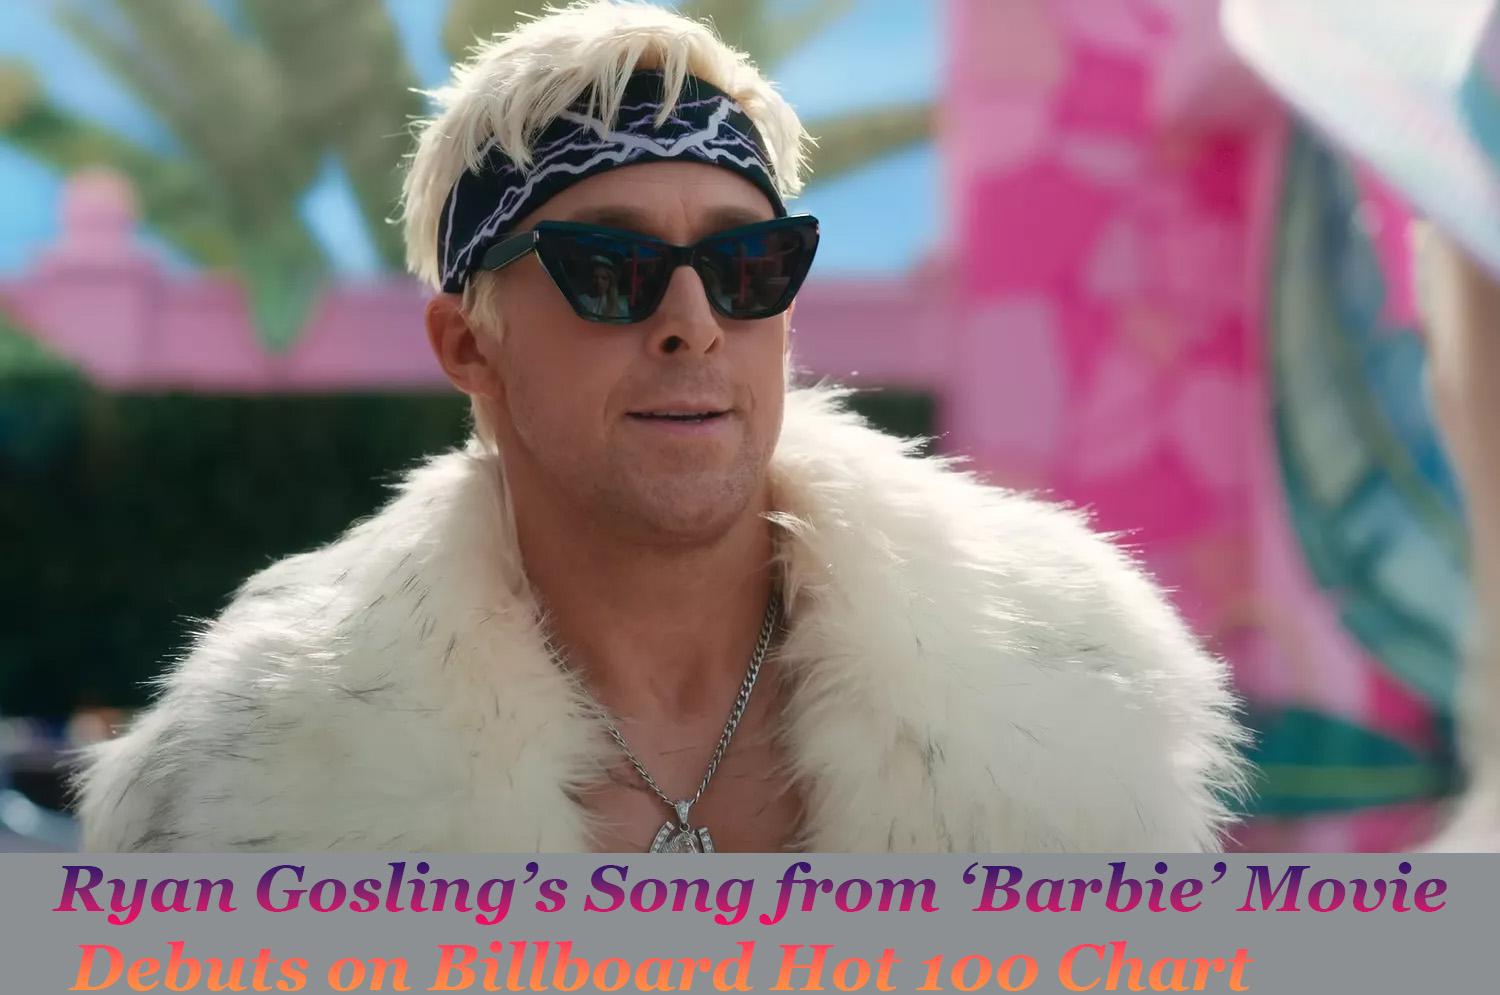 Ryan Gosling’s Song from ‘Barbie’ Movie Debuts on Billboard Hot 100 Chart